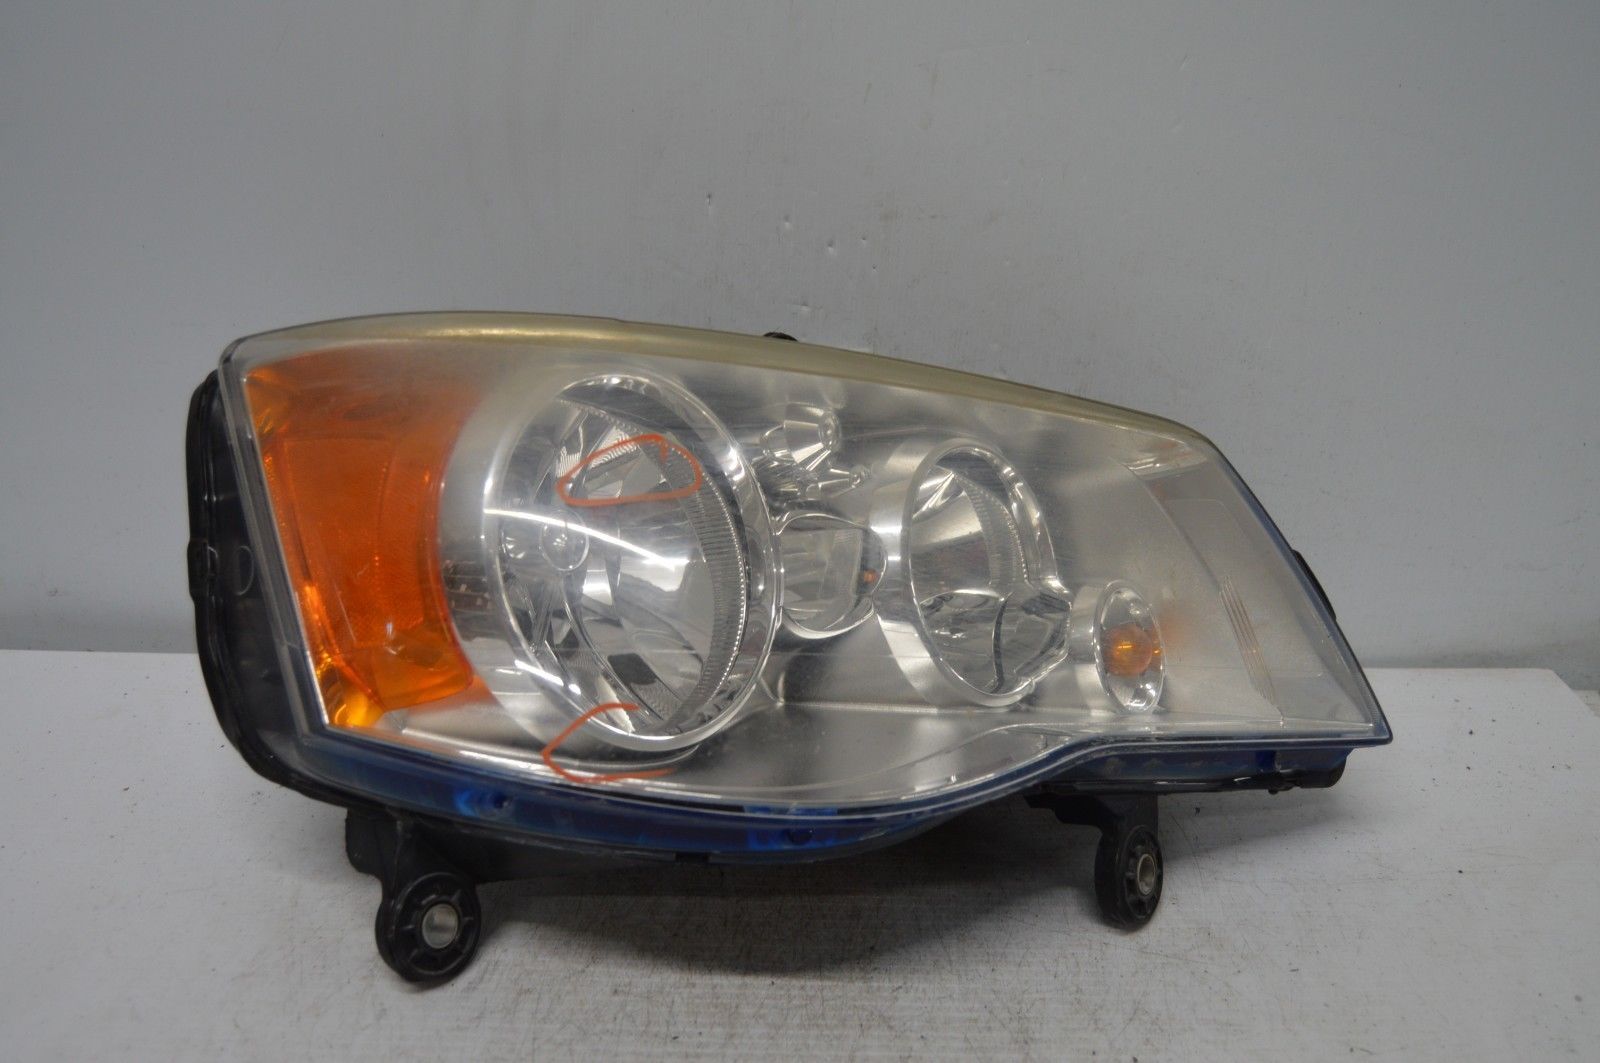 2003 CHRYSLER TOWN AND COUNTRY RIGHT HEADLIGHT HEADLAMP ASSEMBLY AS22#006 - Tail Lights 2003 Chrysler Town And Country Headlight Bulb